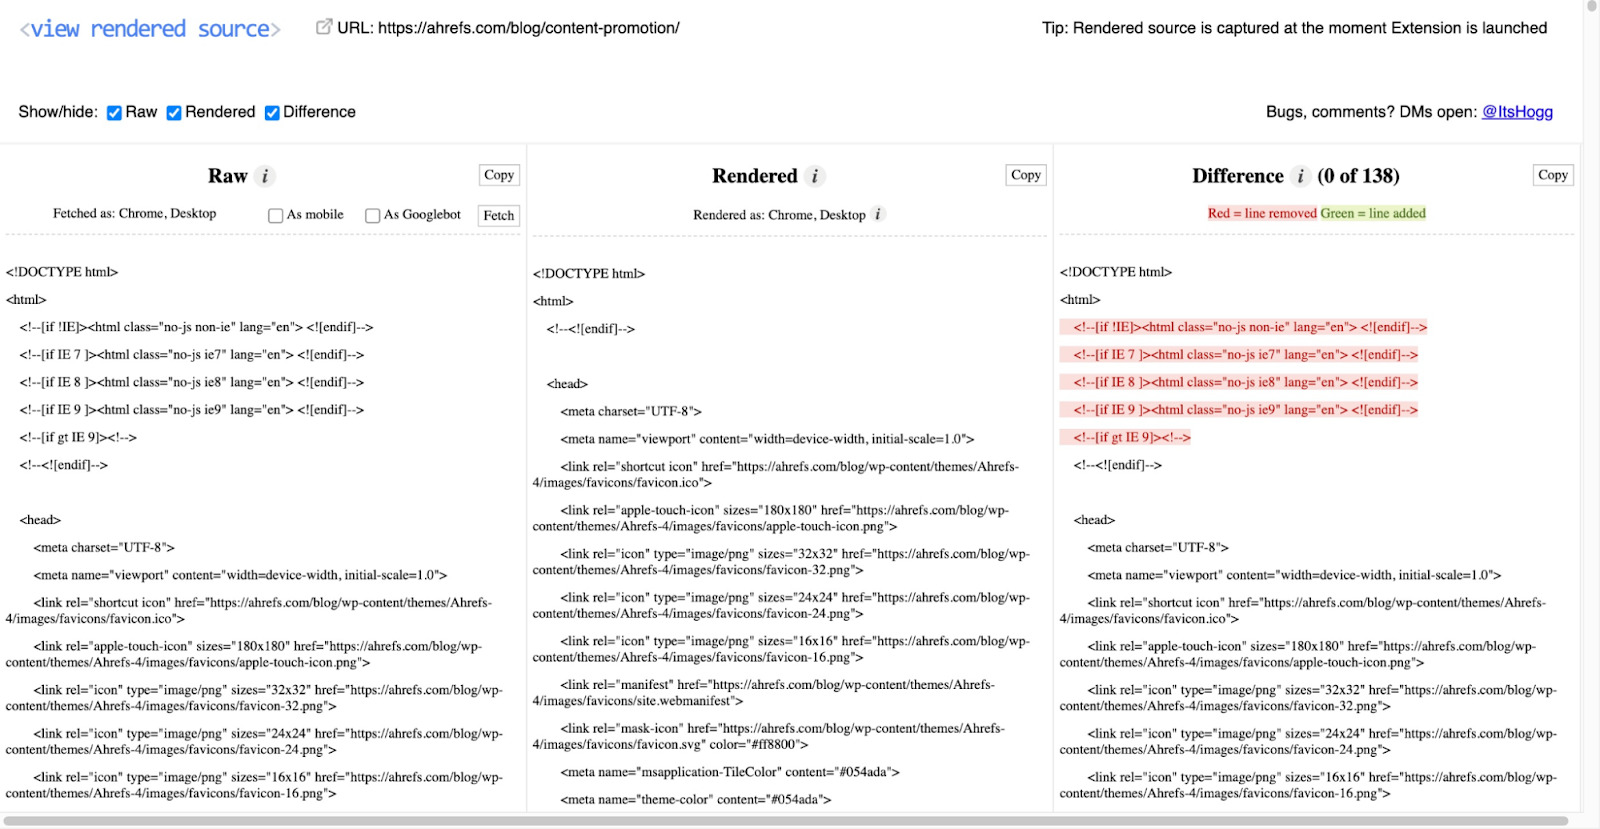 Page showing three columns: raw HTML, rendered HTML, and what the differences are